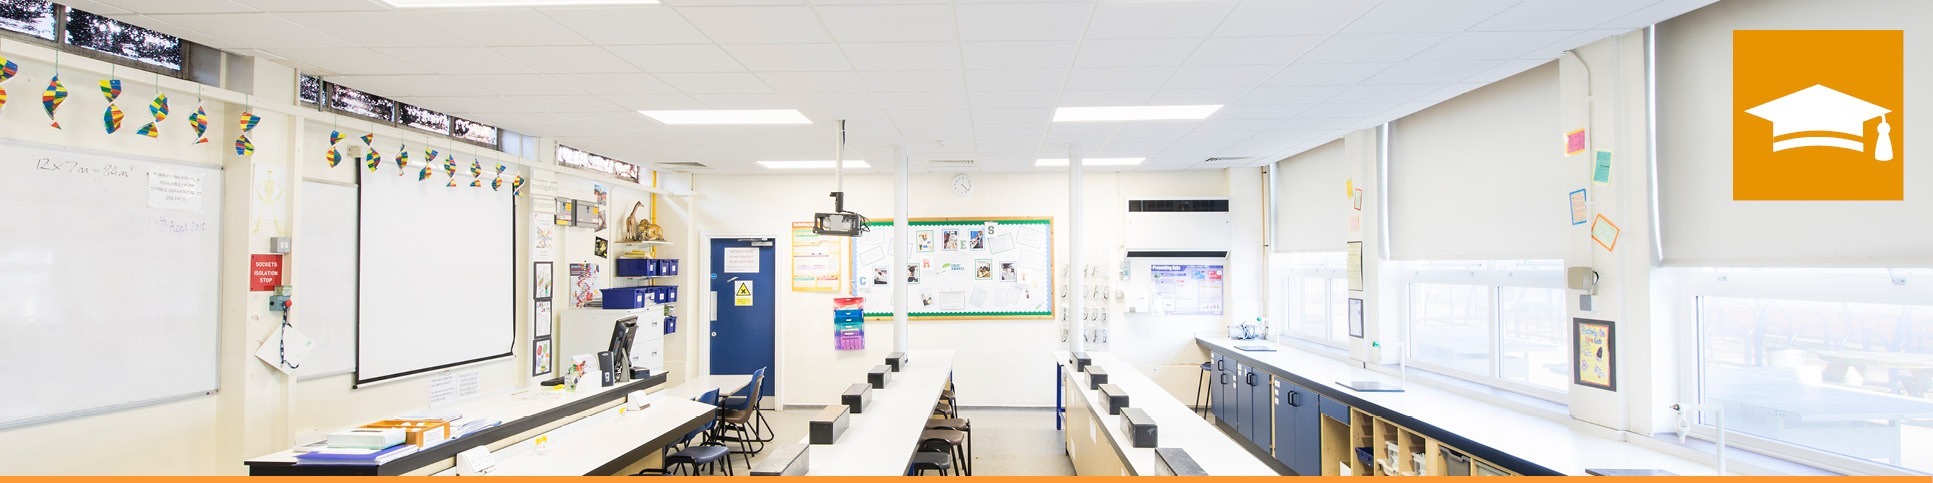 Tamlite Lighting for Education Wellbeing classroom with icon header